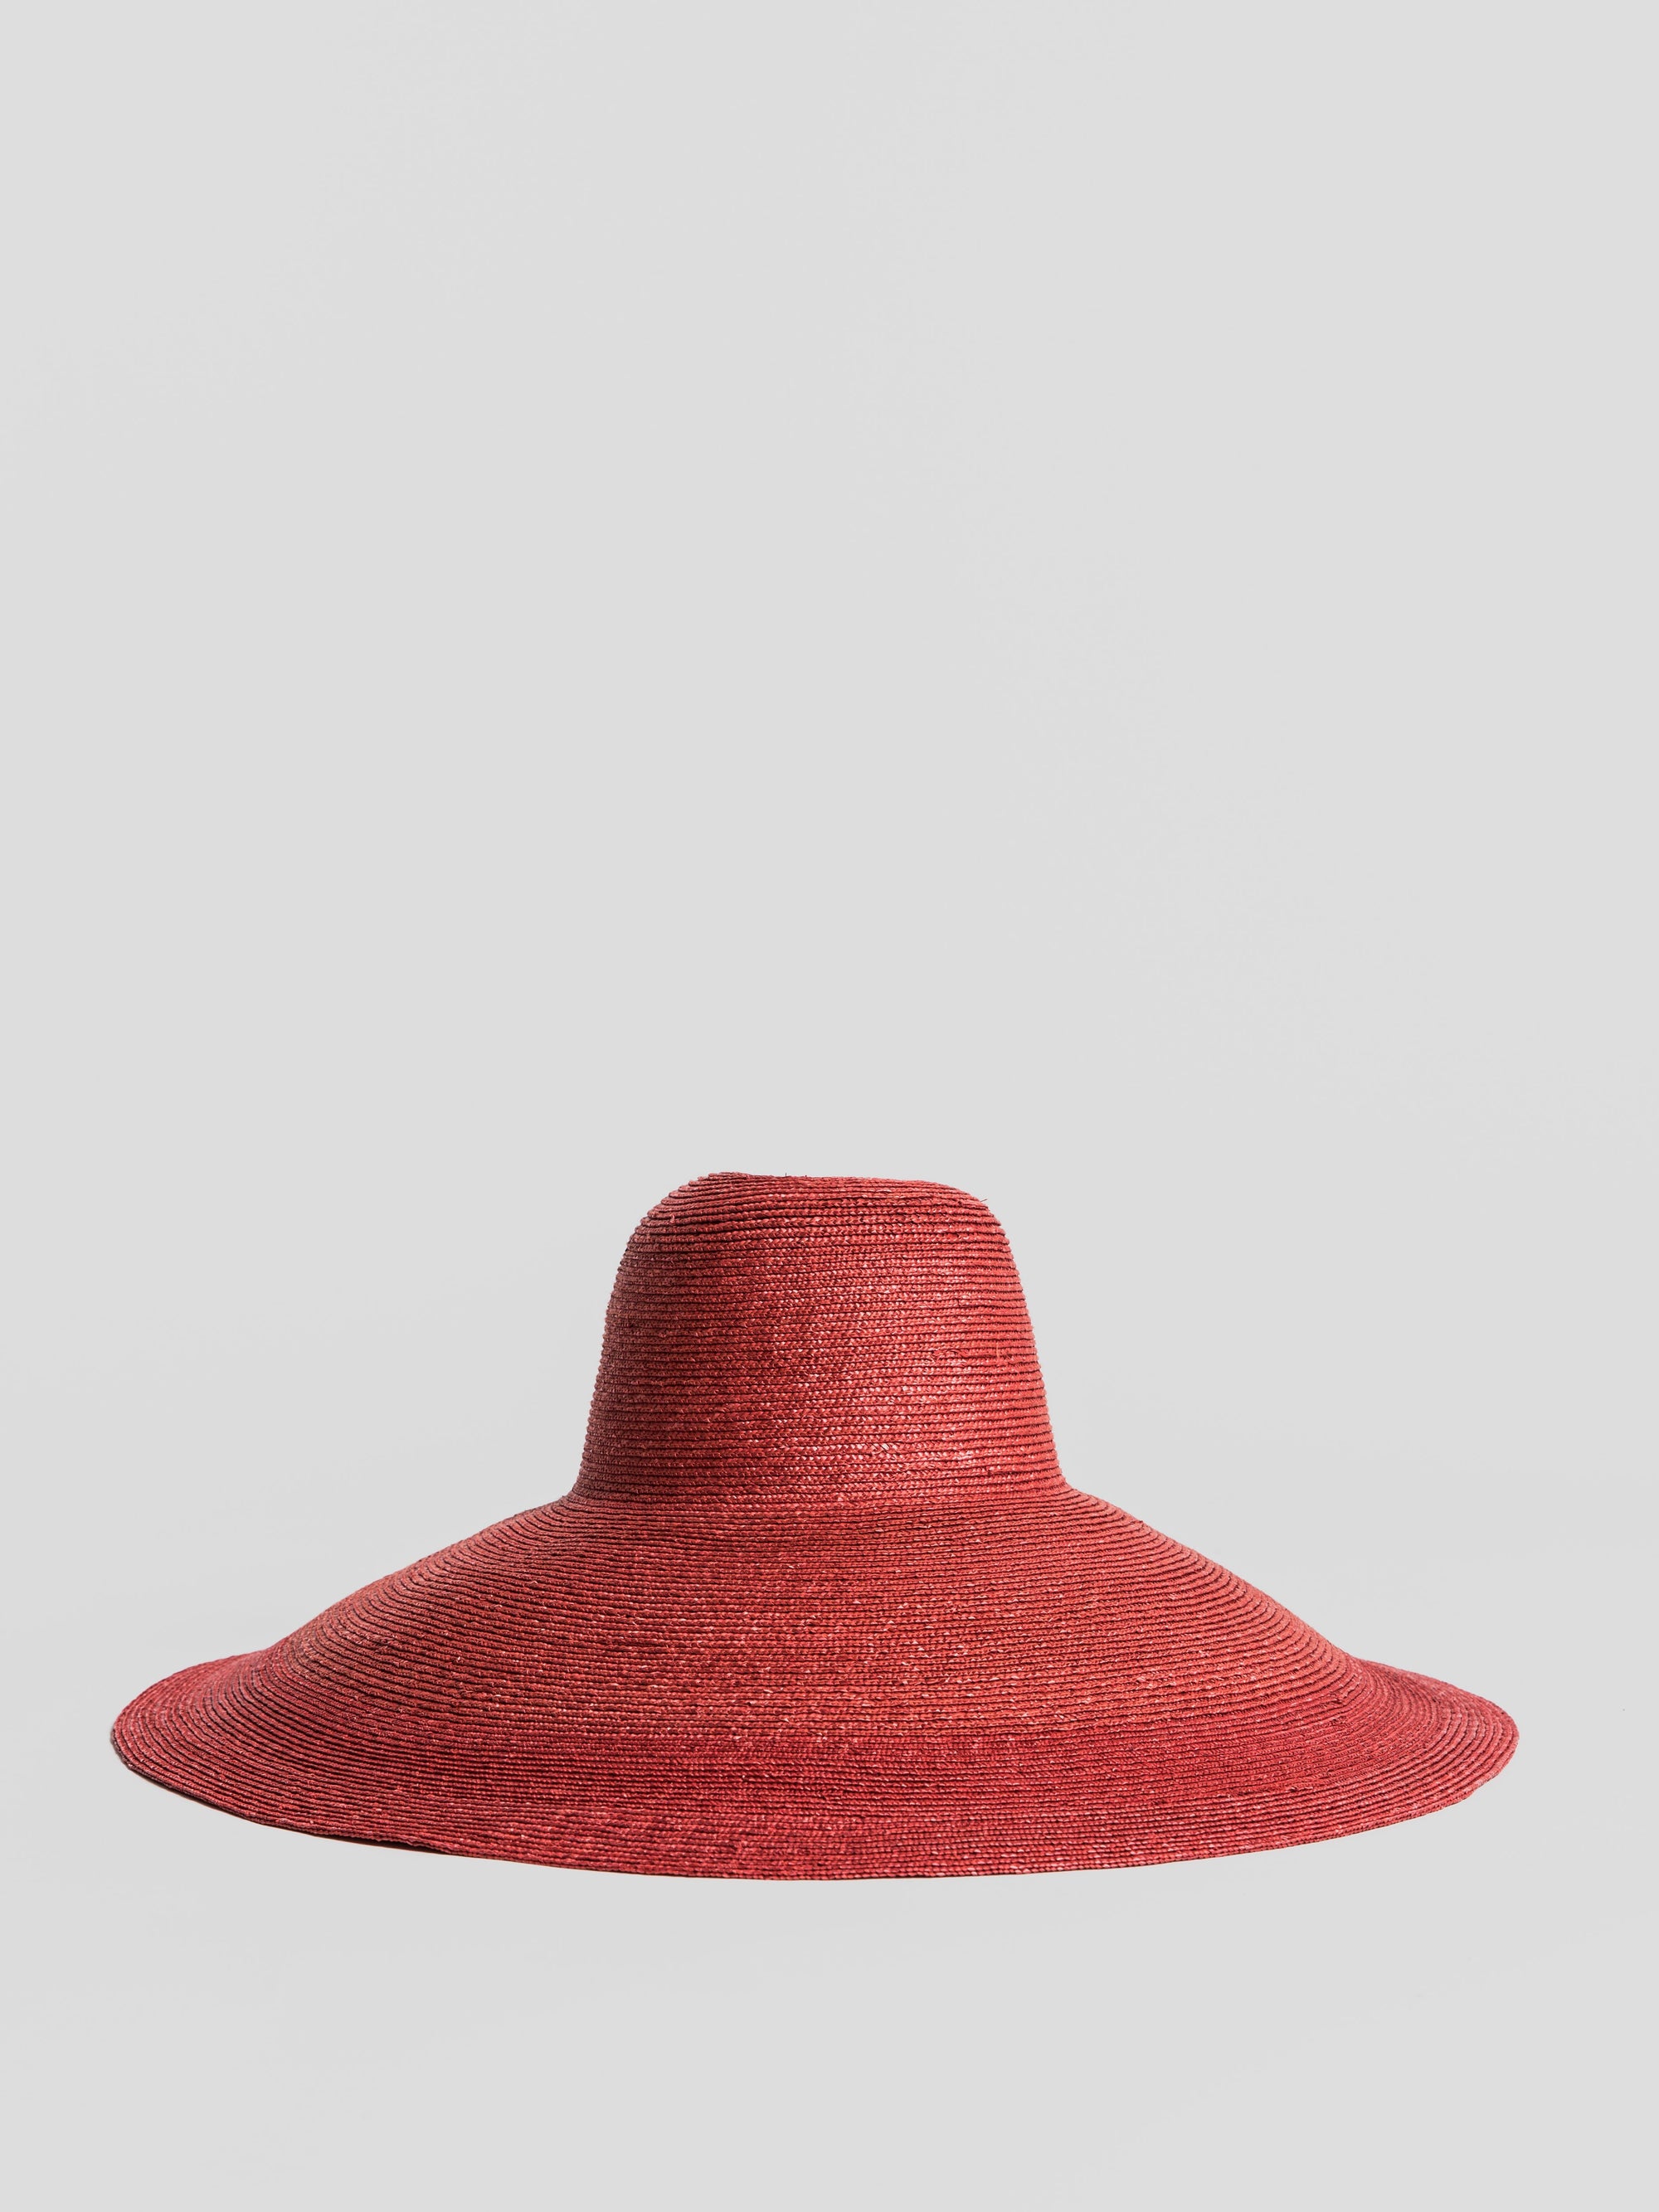 Straw Hat - Braided Capeline Wide Red Hats éN Hats 